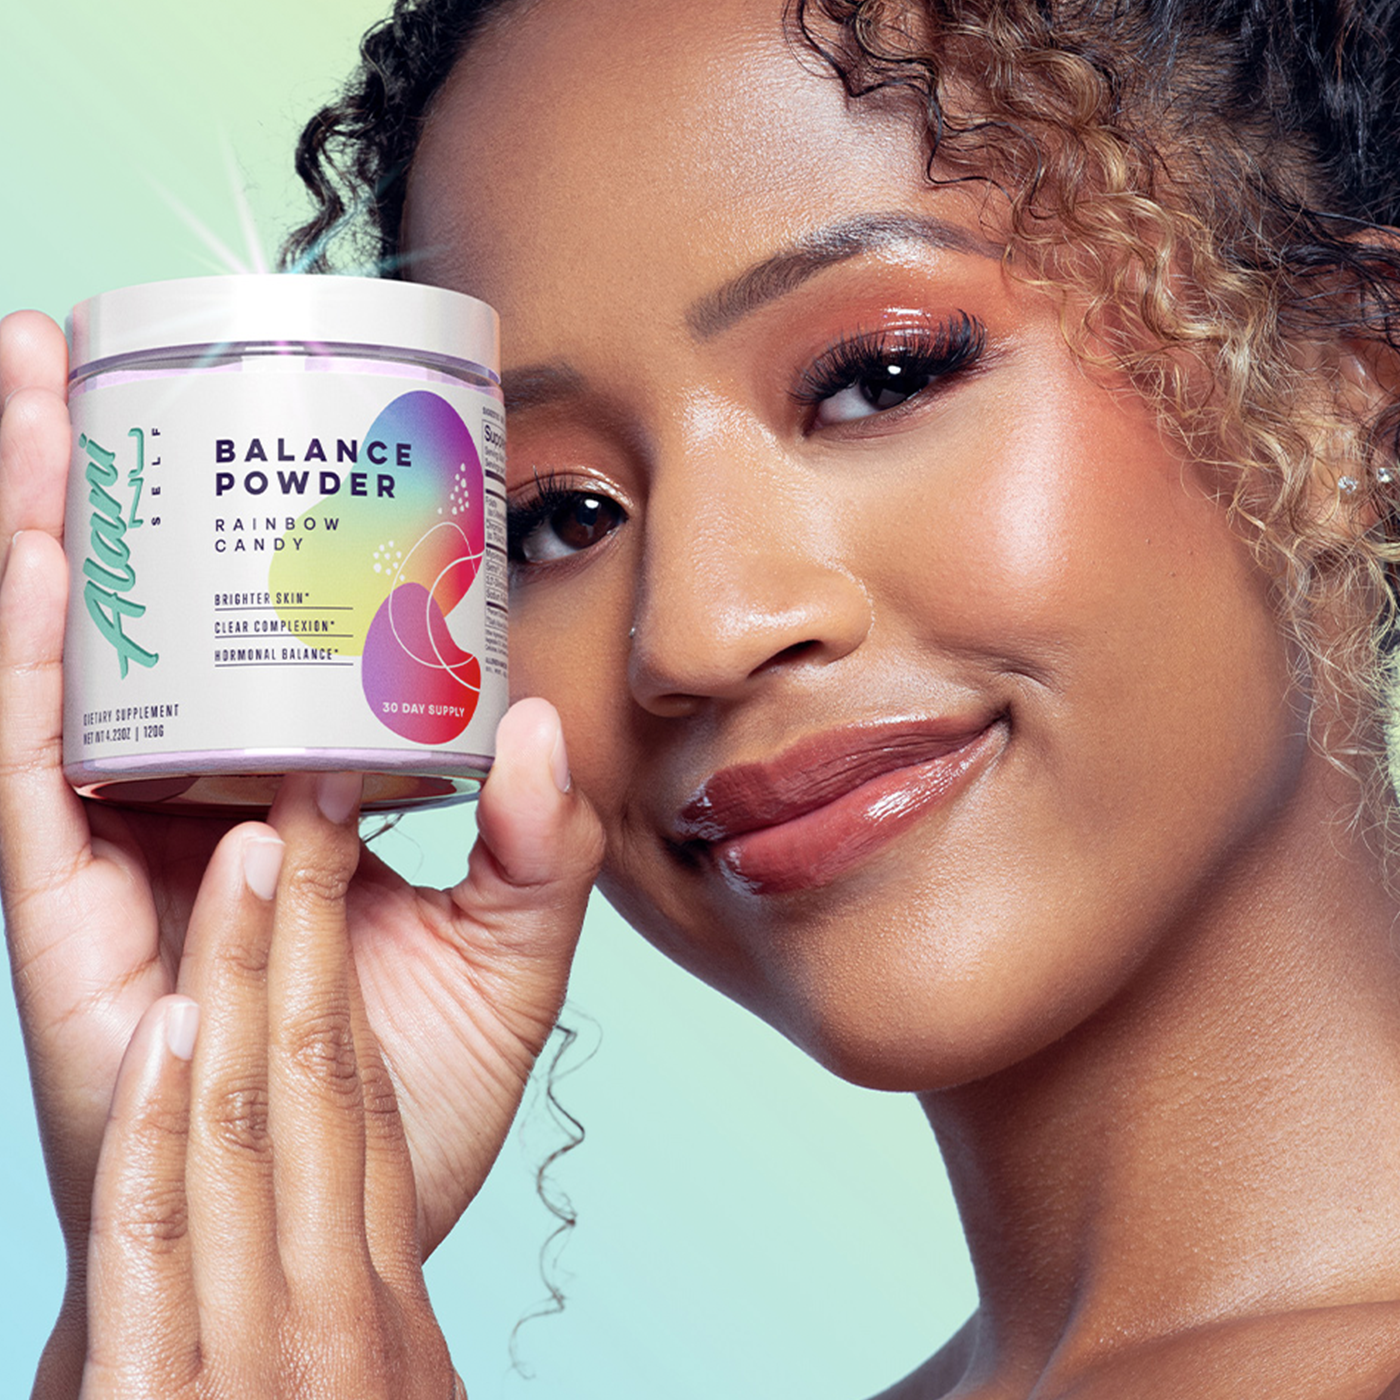 A smiling woman holding up a container of Alani Balance Powder in Rainbow Candy flavor, highlighting the product's benefits for brighter skin and hormonal balance, with a radiant, confident demeanor.